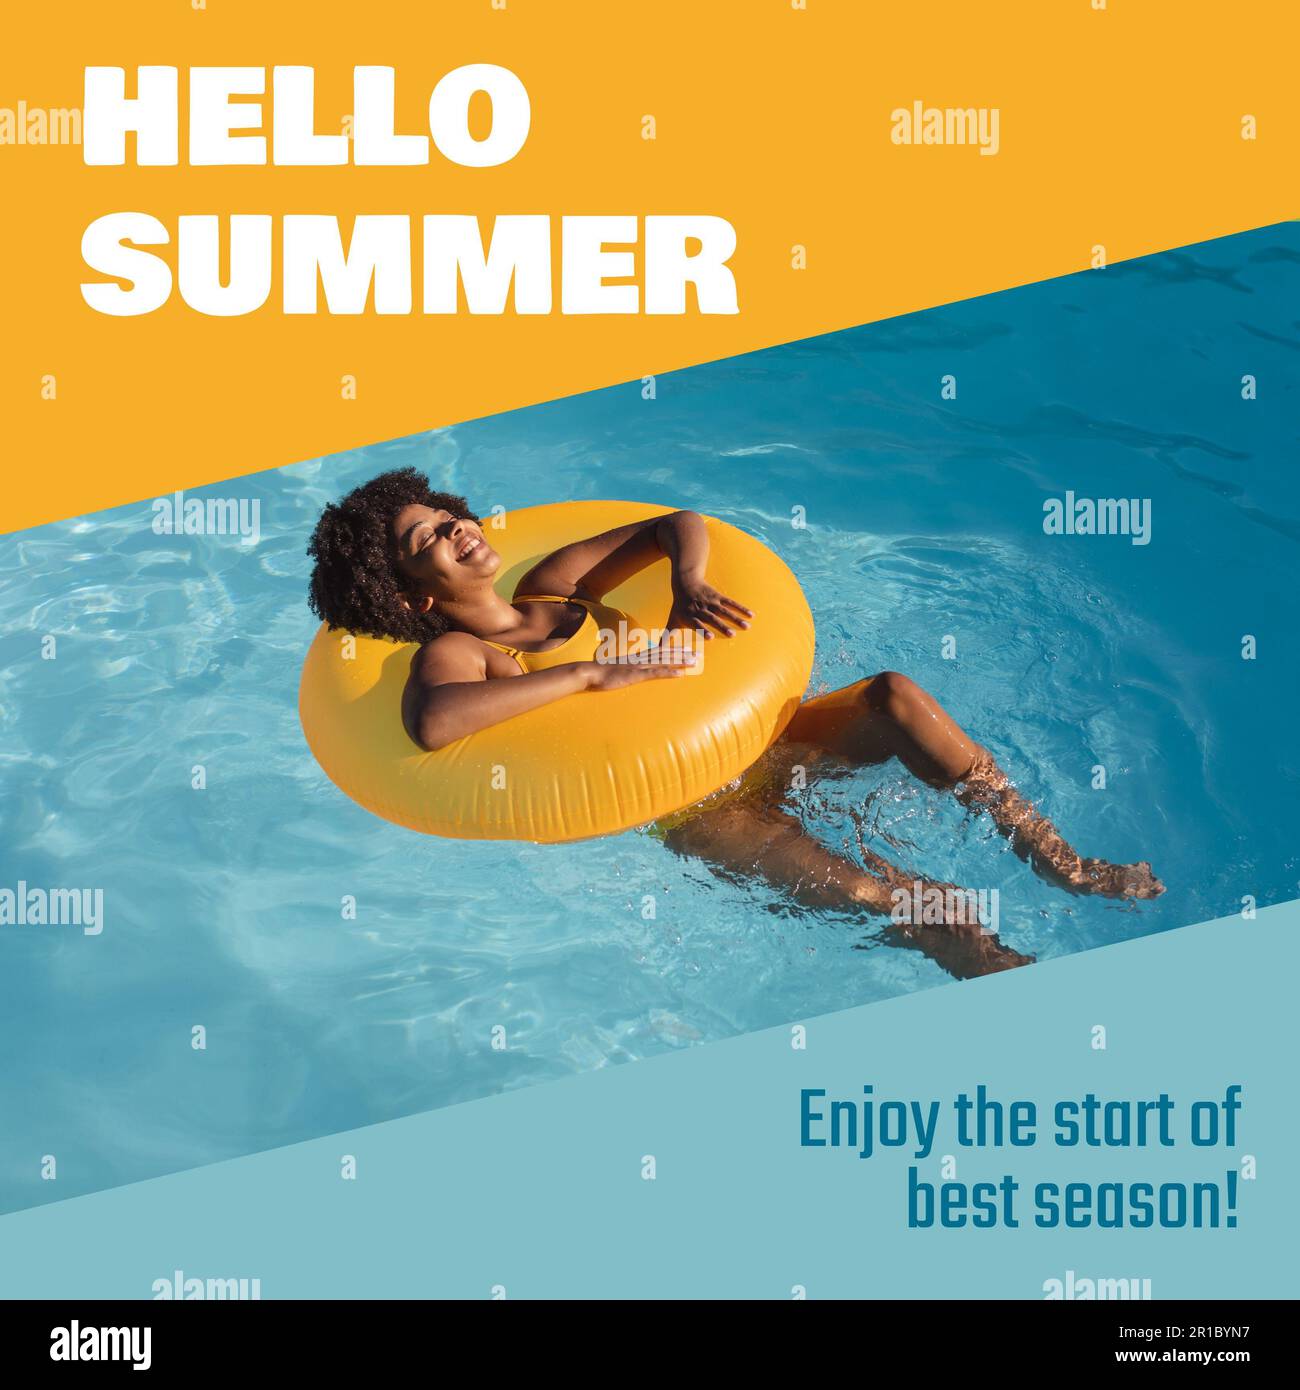 Hello summer text and african american woman with afro hair relaxing on inflatable swim ring in pool Stock Photo